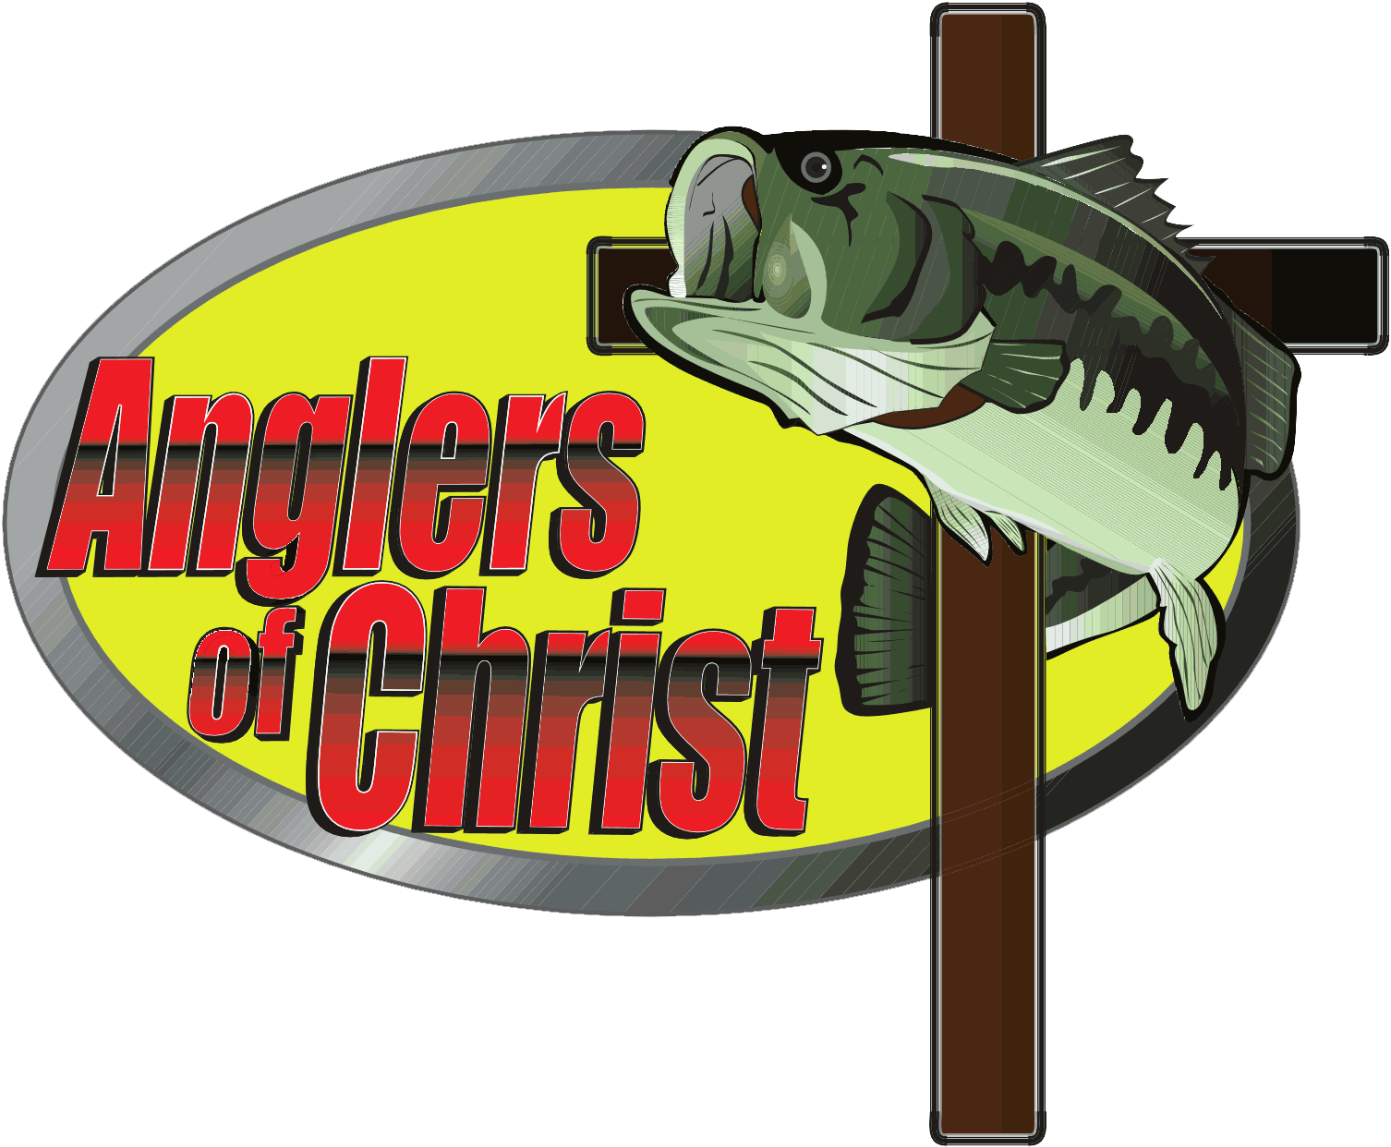 Anglers Of Christ Was Formed In Lafayette, Louisiana - Angling (1422x1185)